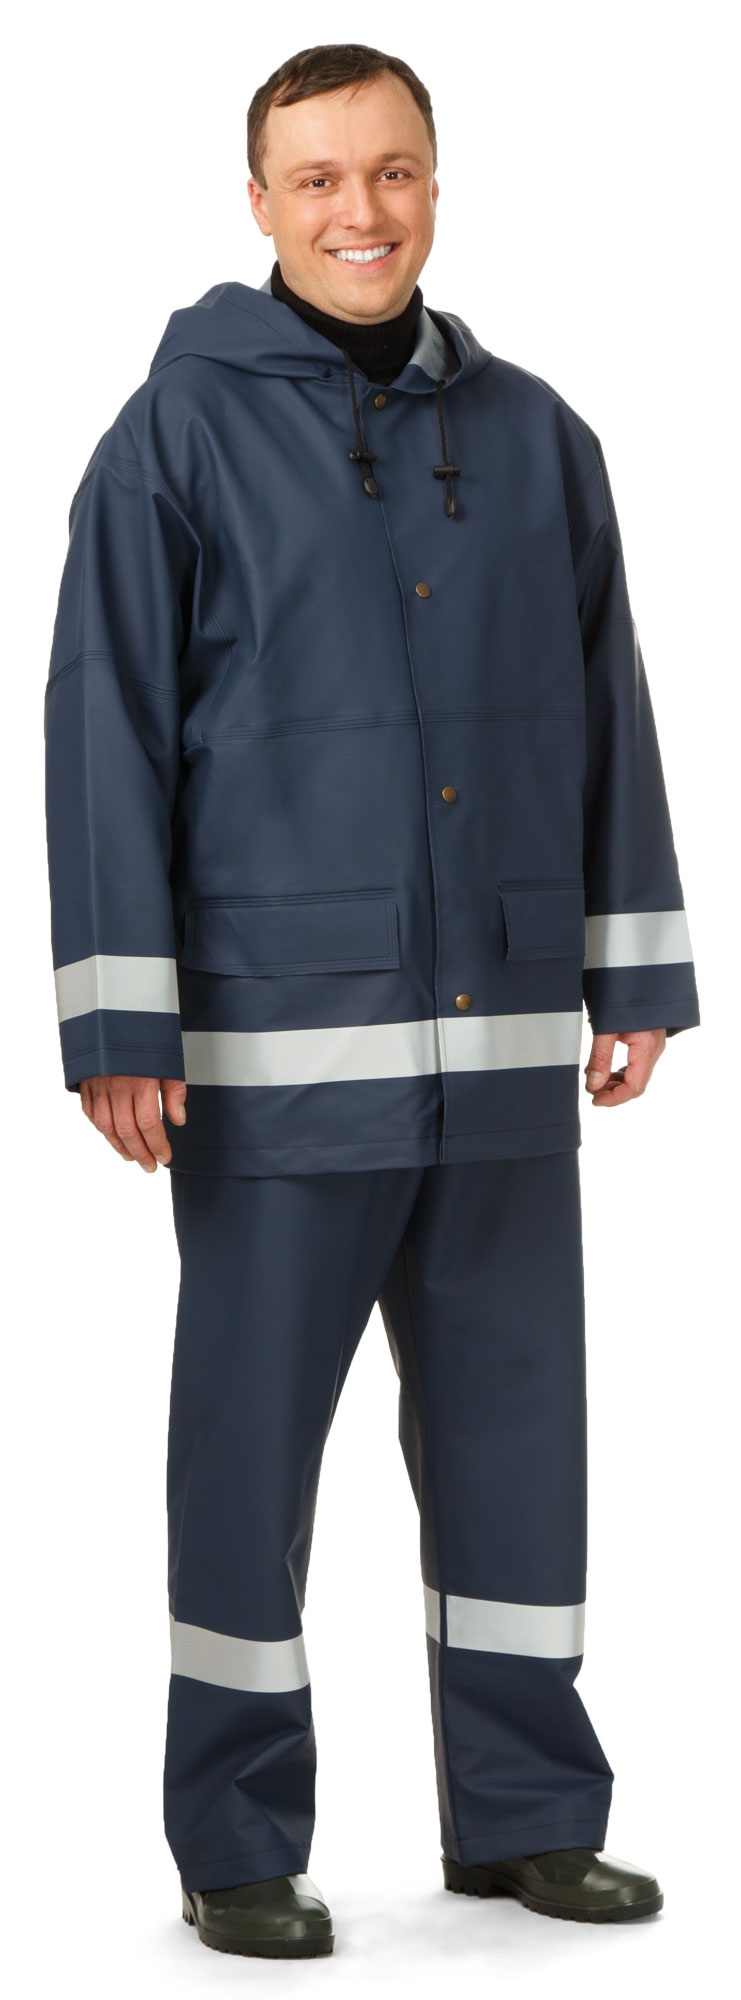 CYCLONE men's PVC waterproof work suit with a reflective stripe